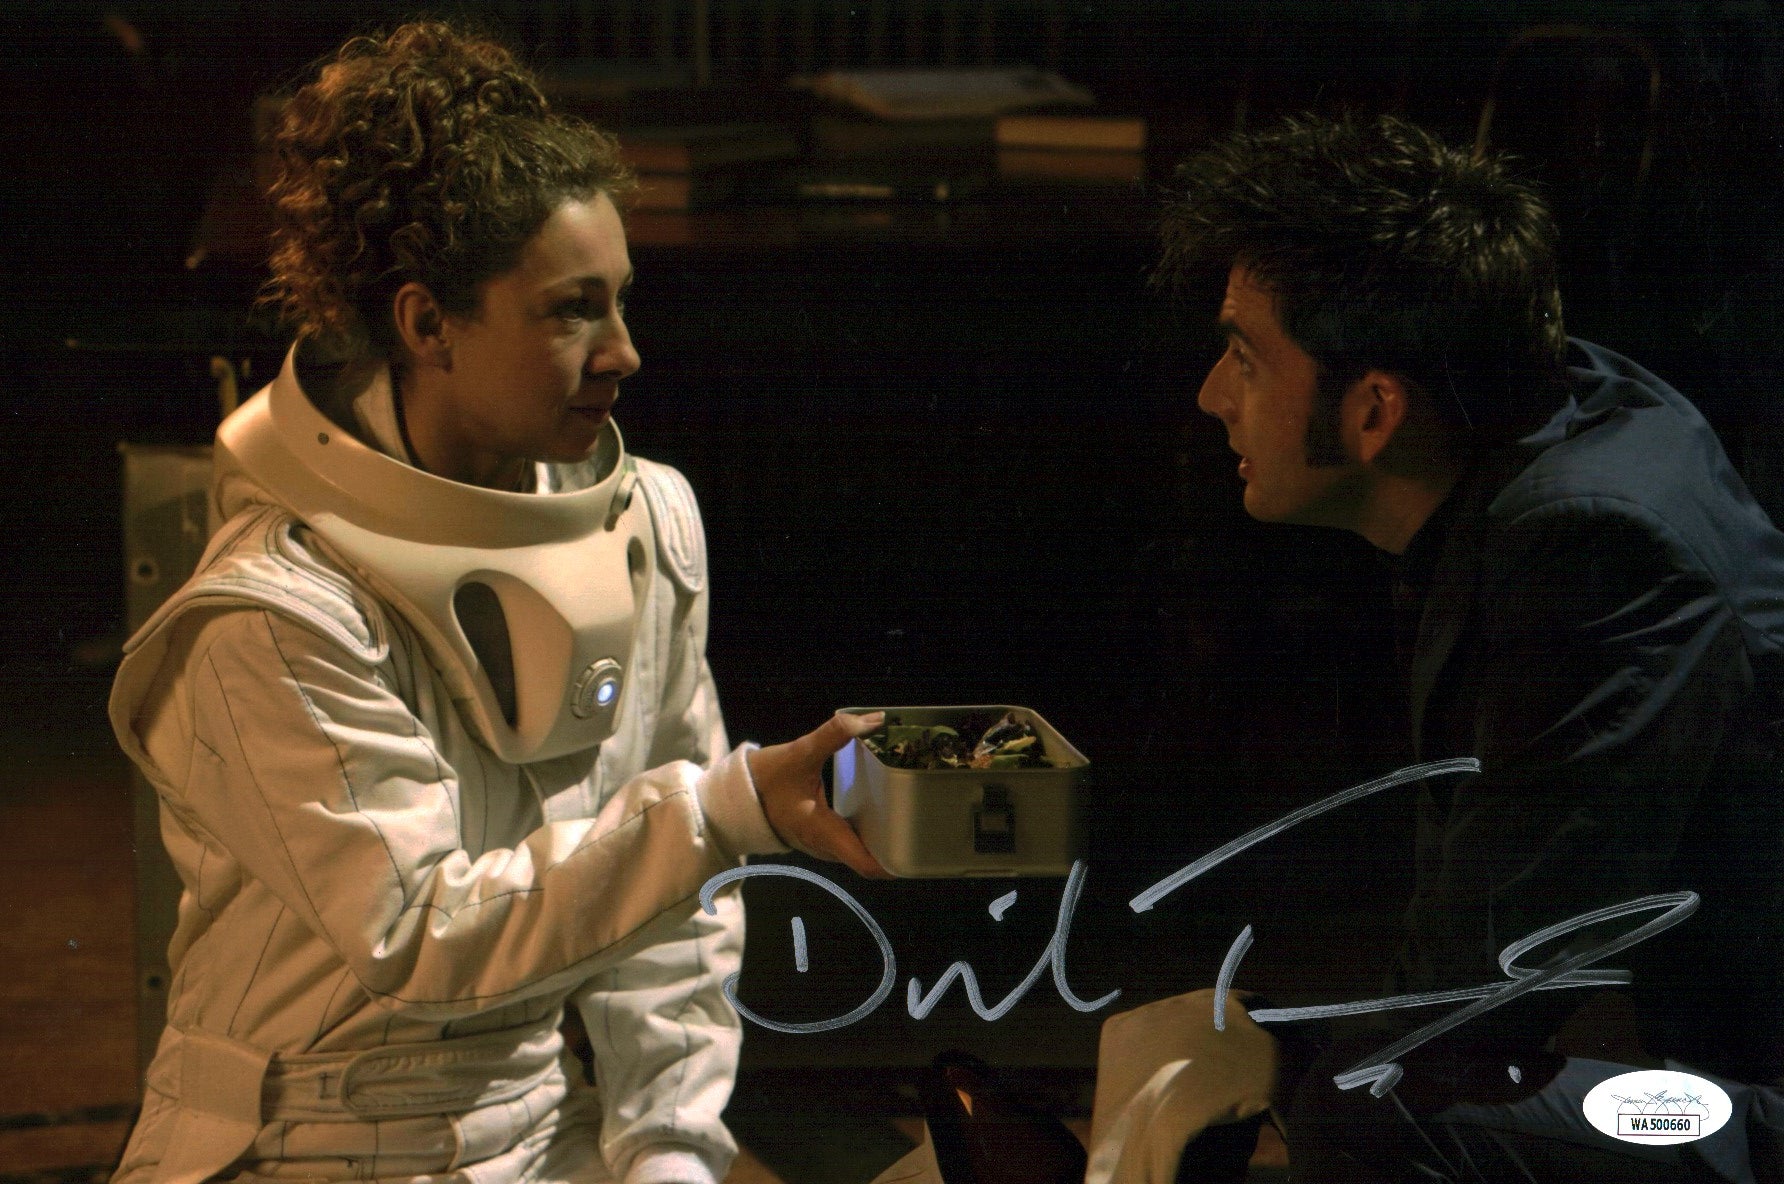 David Tennant Doctor Who 8x12 Signed Photo JSA COA Certified Autograph GalaxyCon